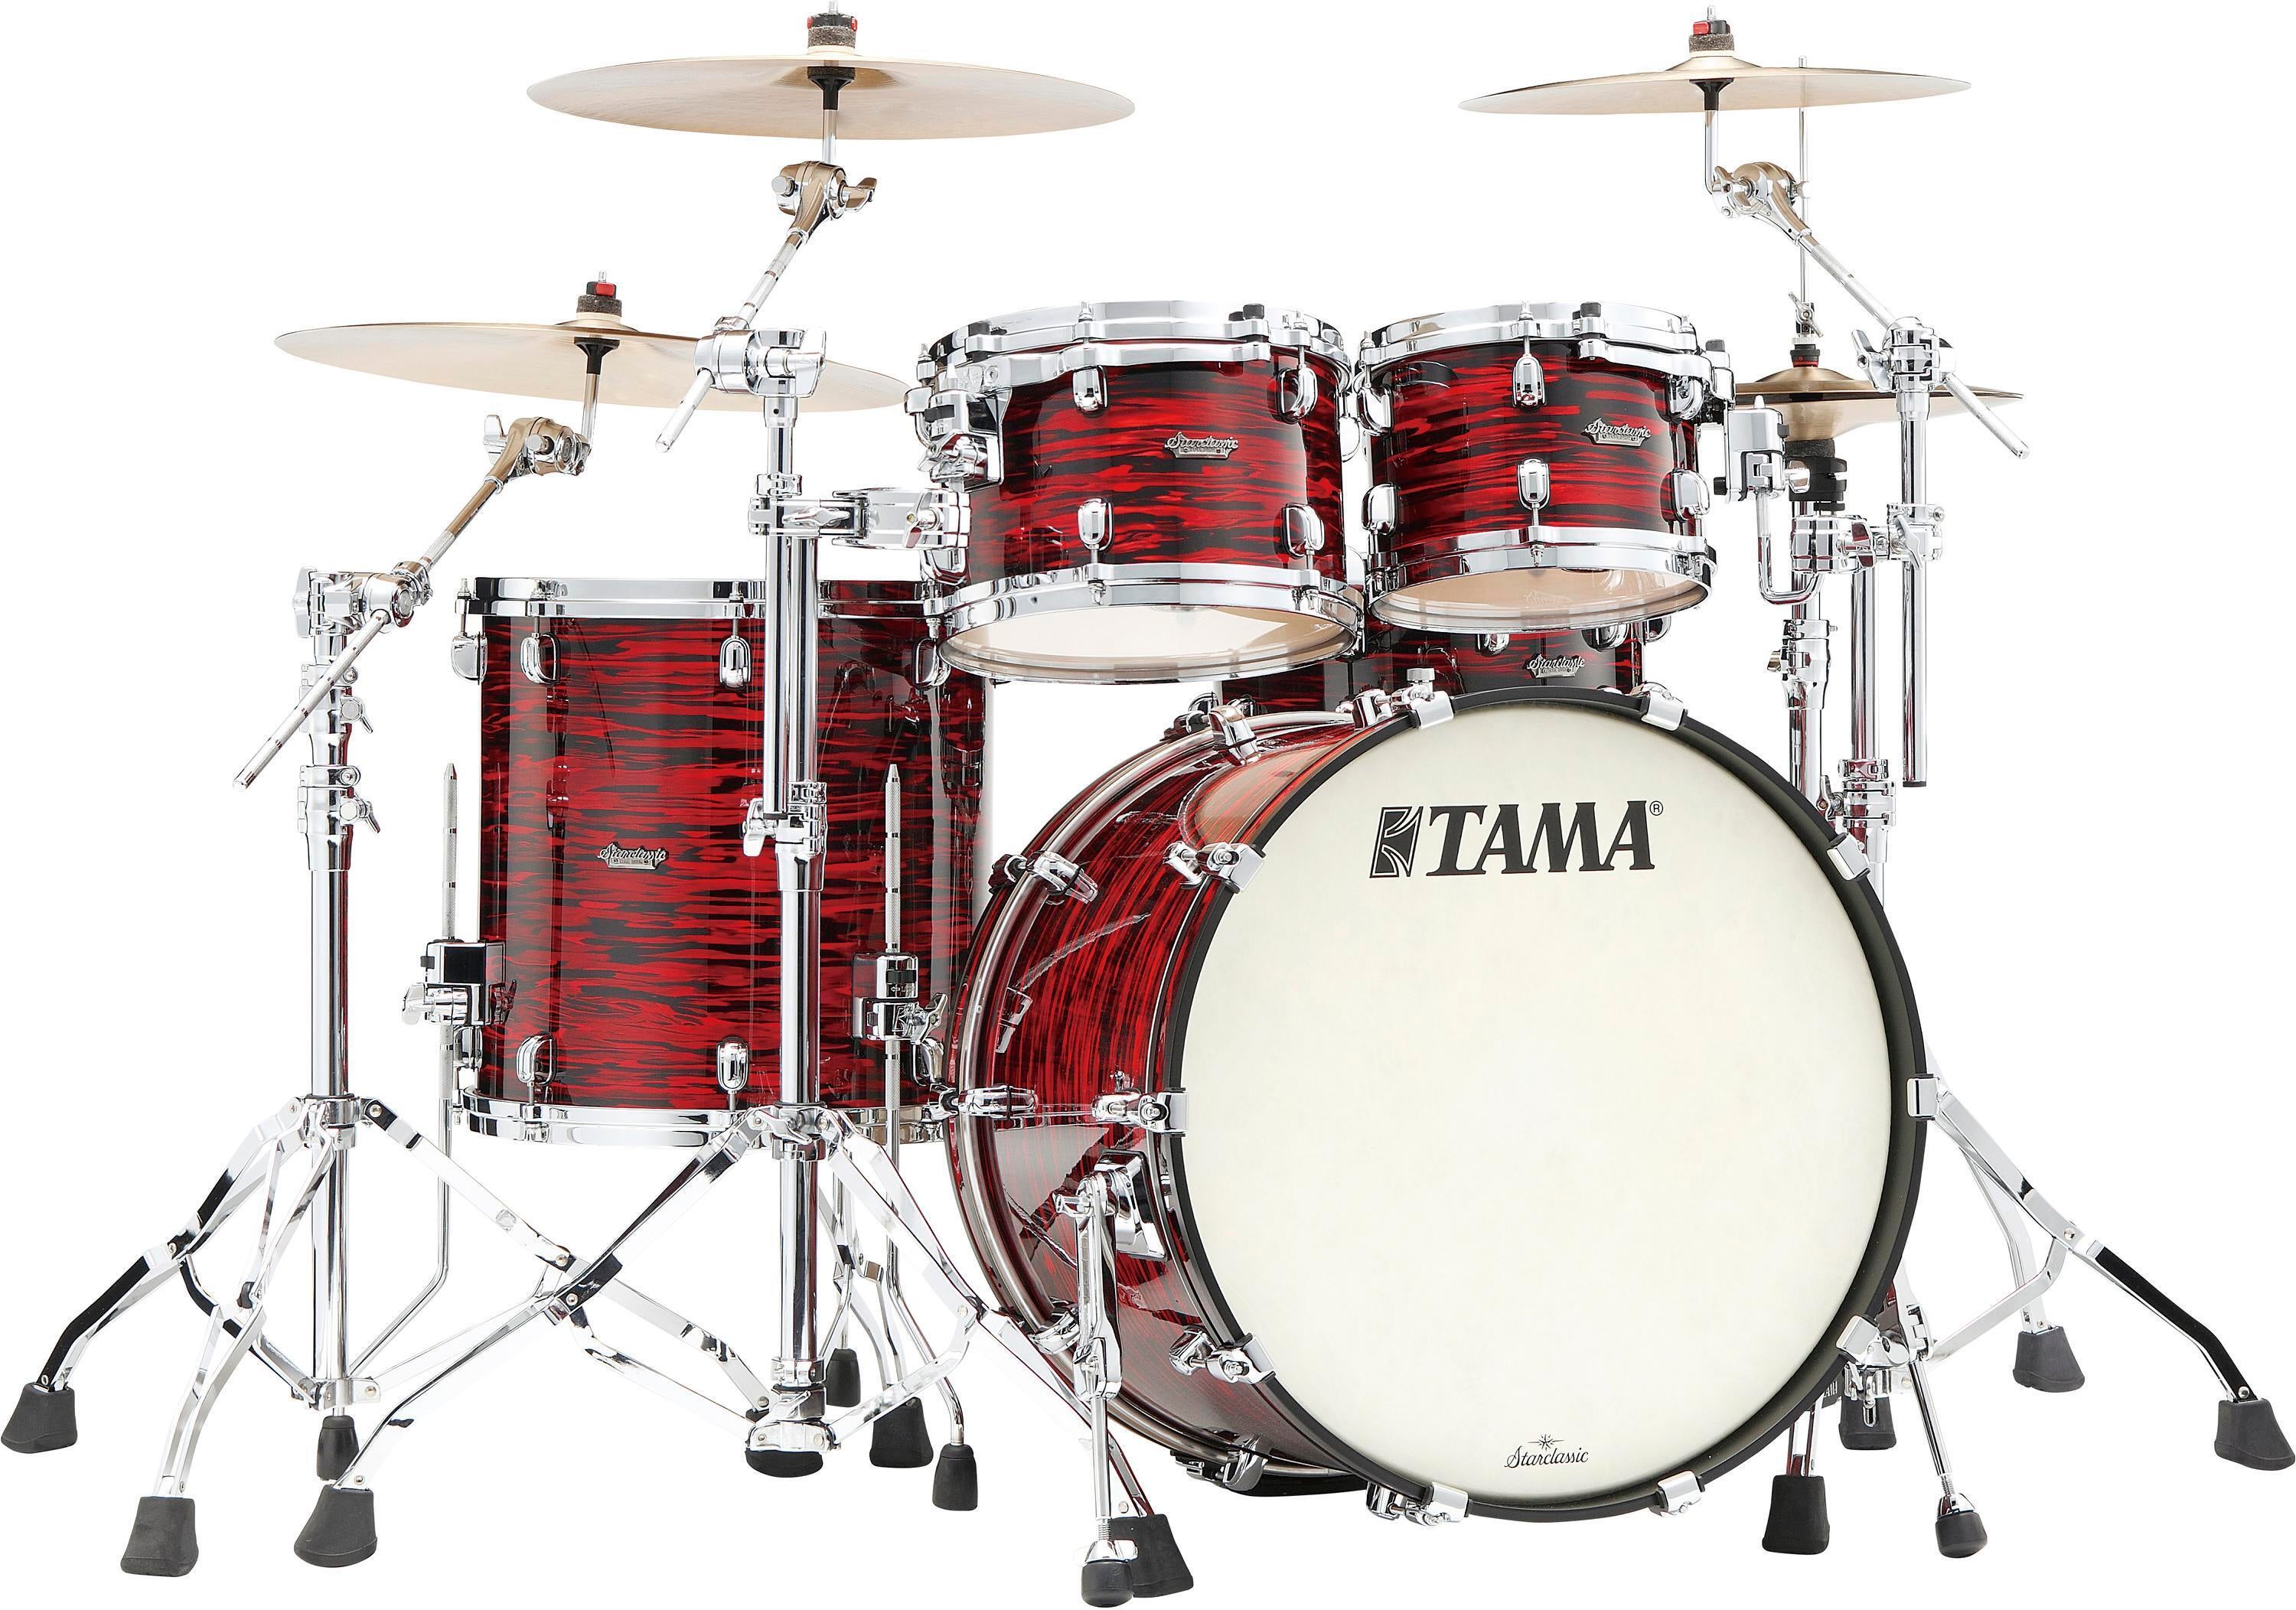 Tama Starclassic Maple MR42TZS 4-piece Shell Pack - Red Oyster 